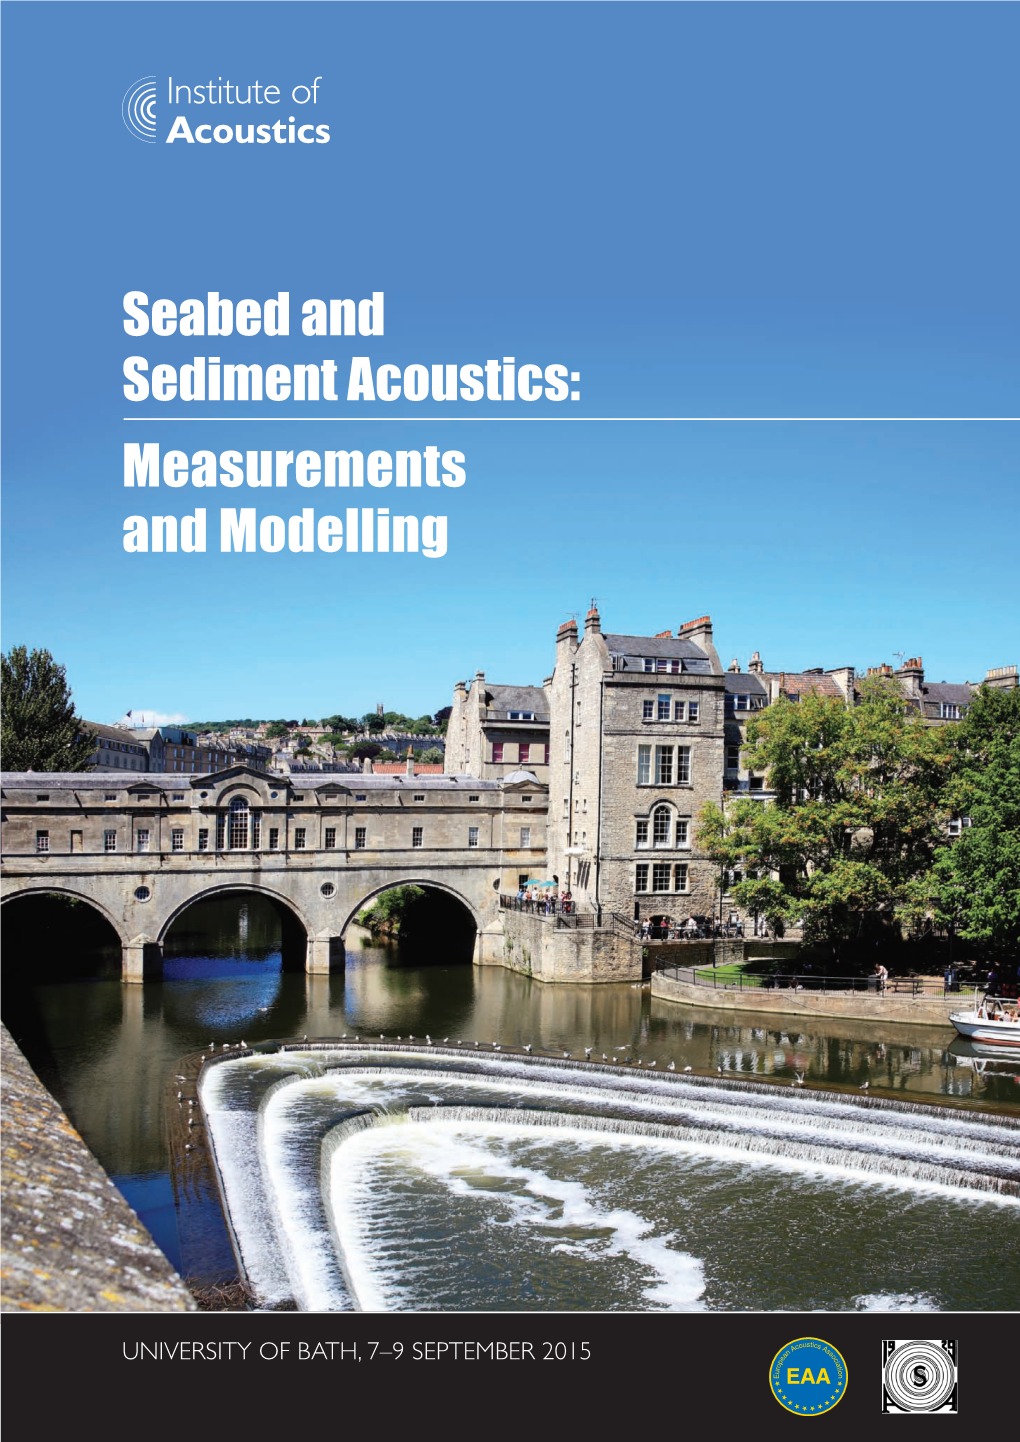 Seabed and Sediment Acoustics: Measurements and Modelling